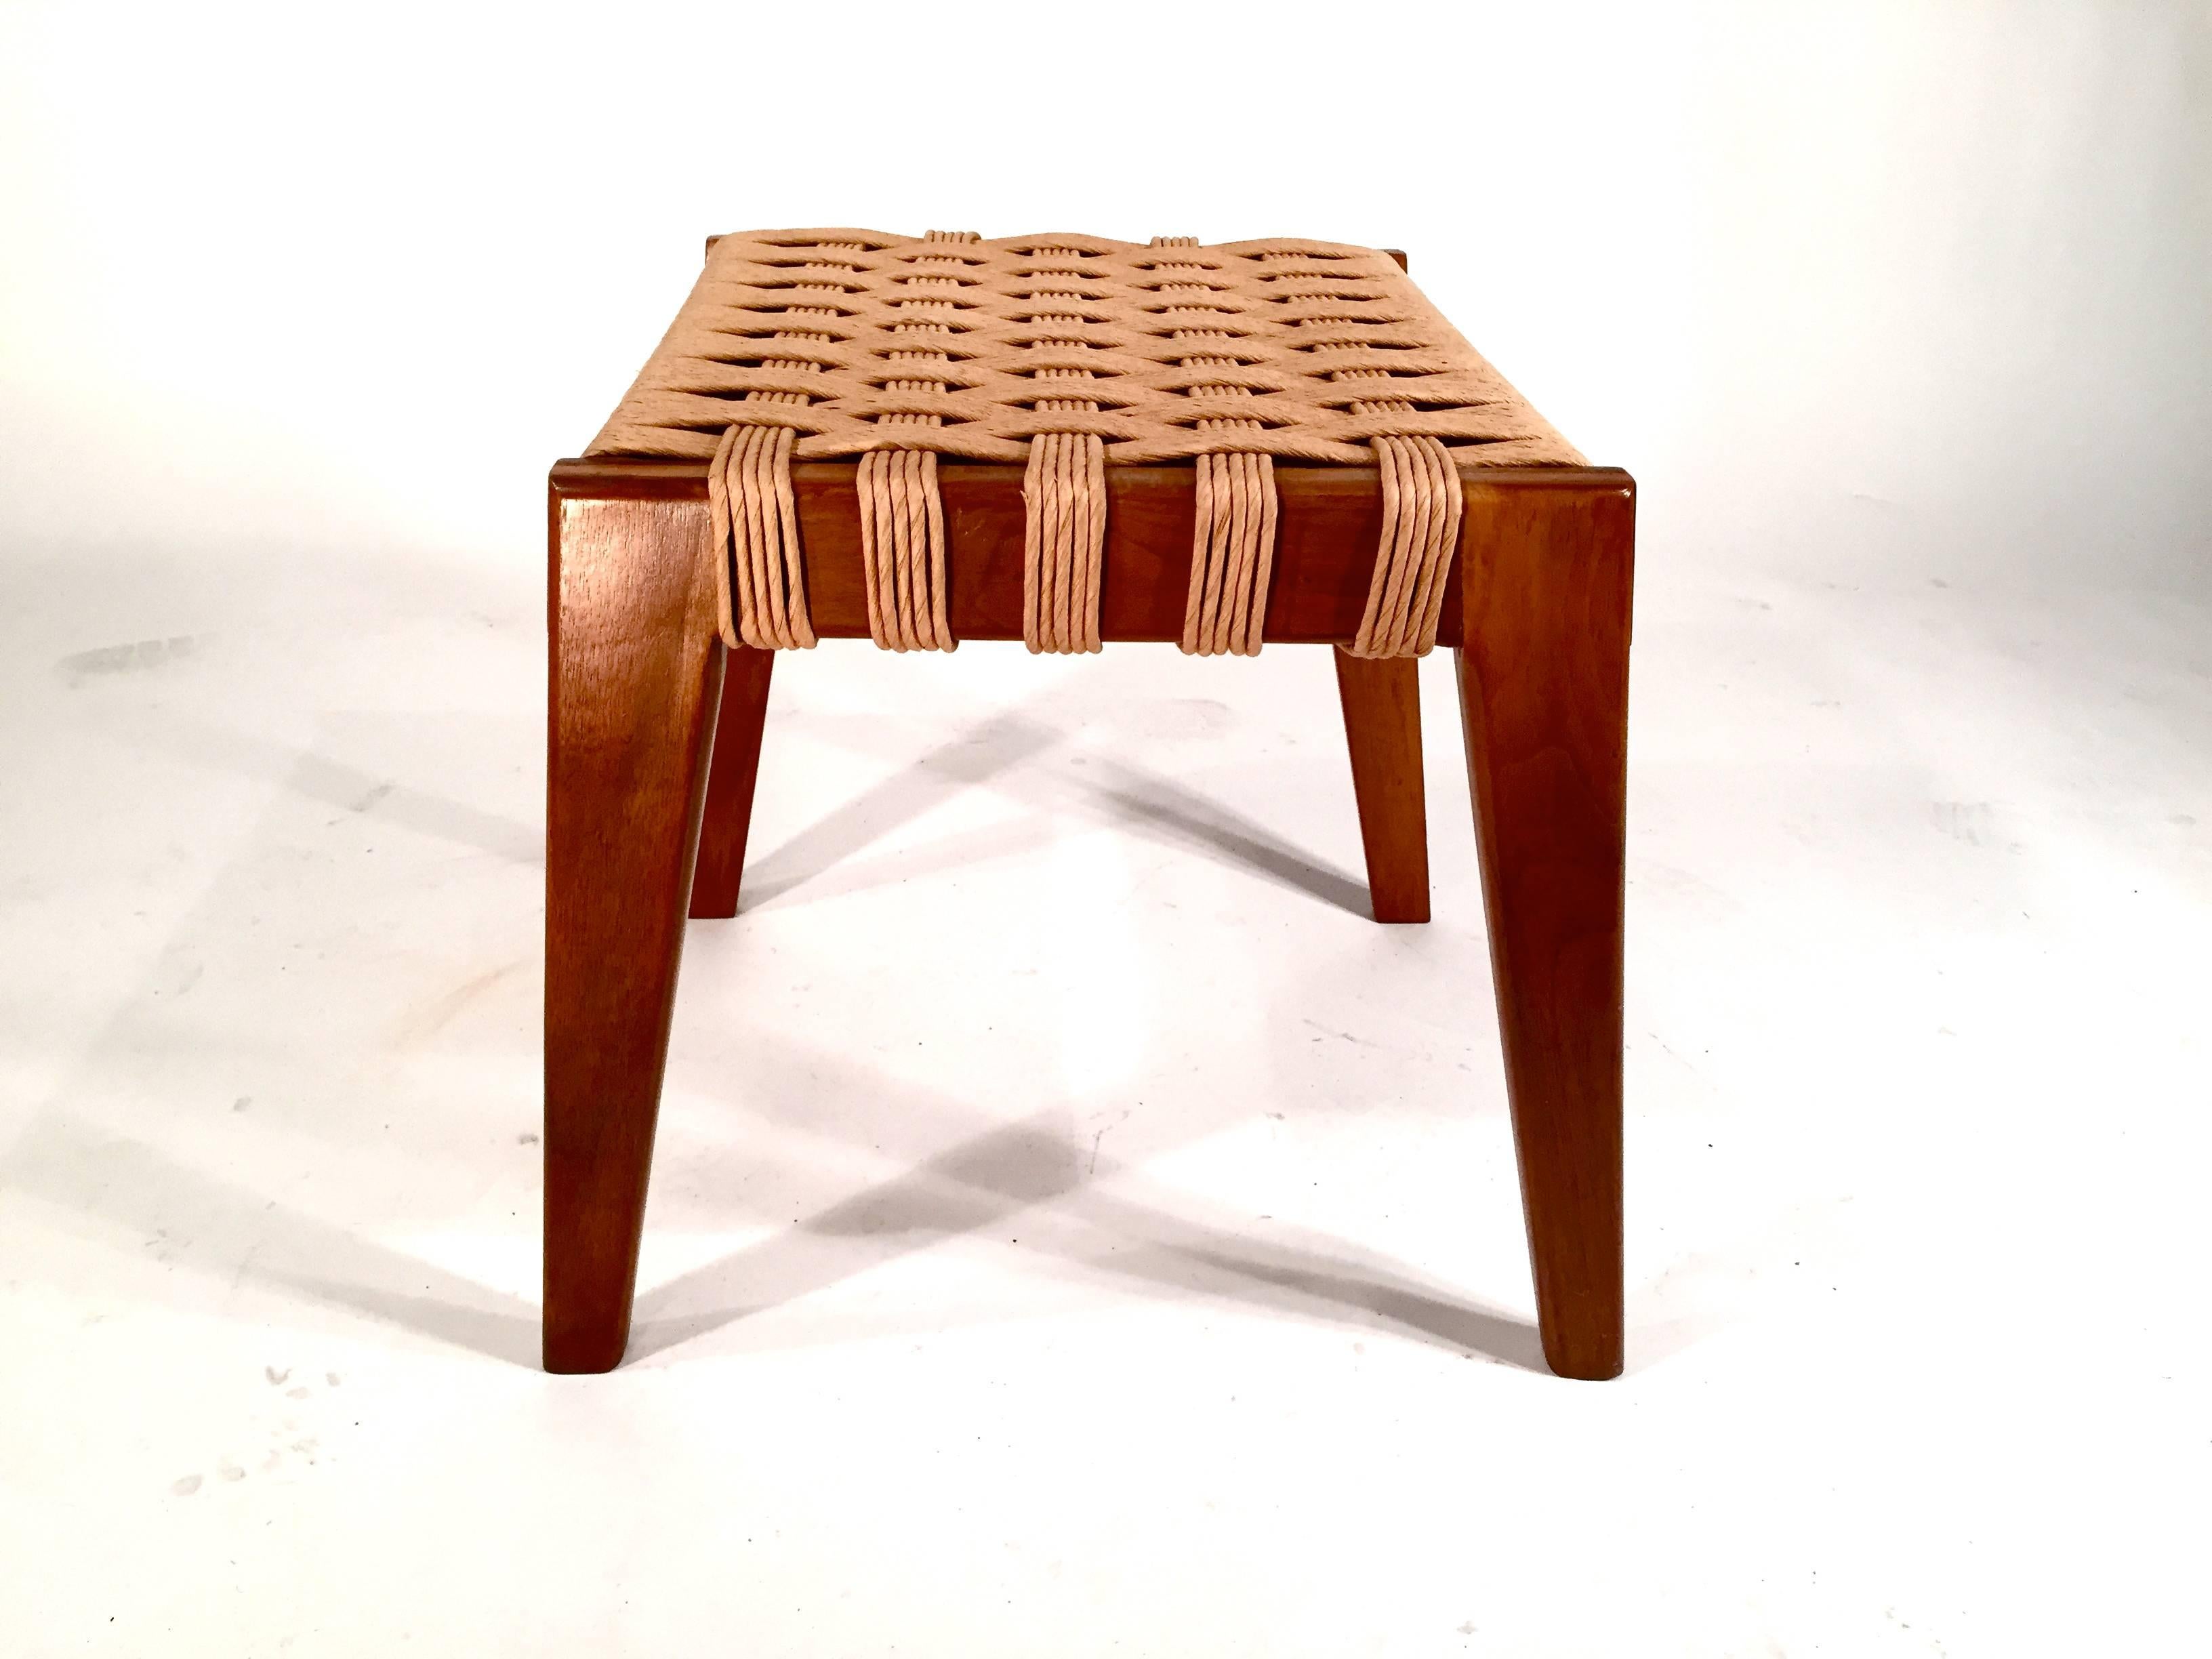 Paper cord stool or ottoman. Very well made with nice construction, Denmark, 1960s.